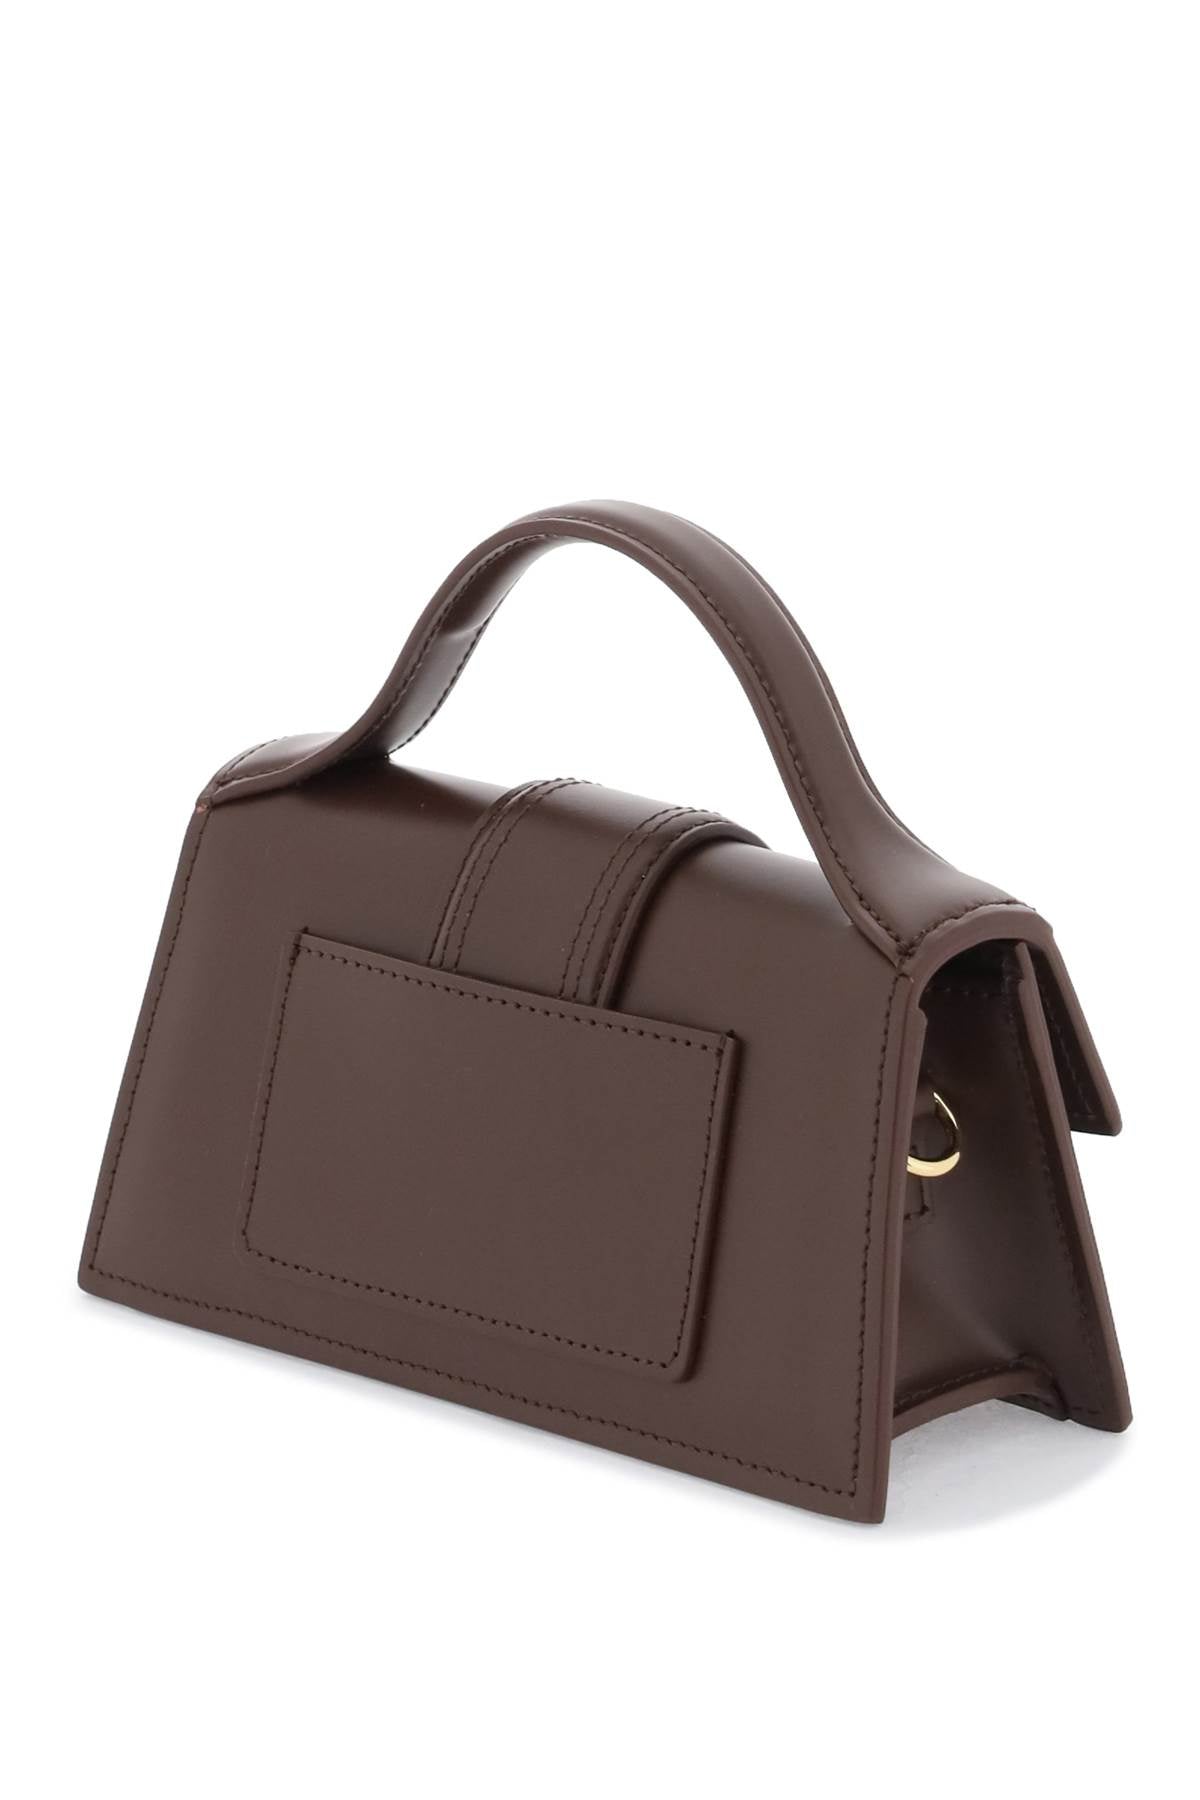 JACQUEMUS Chic Mini Leather Handbag with Gold Details and Convertible Strap - Brown